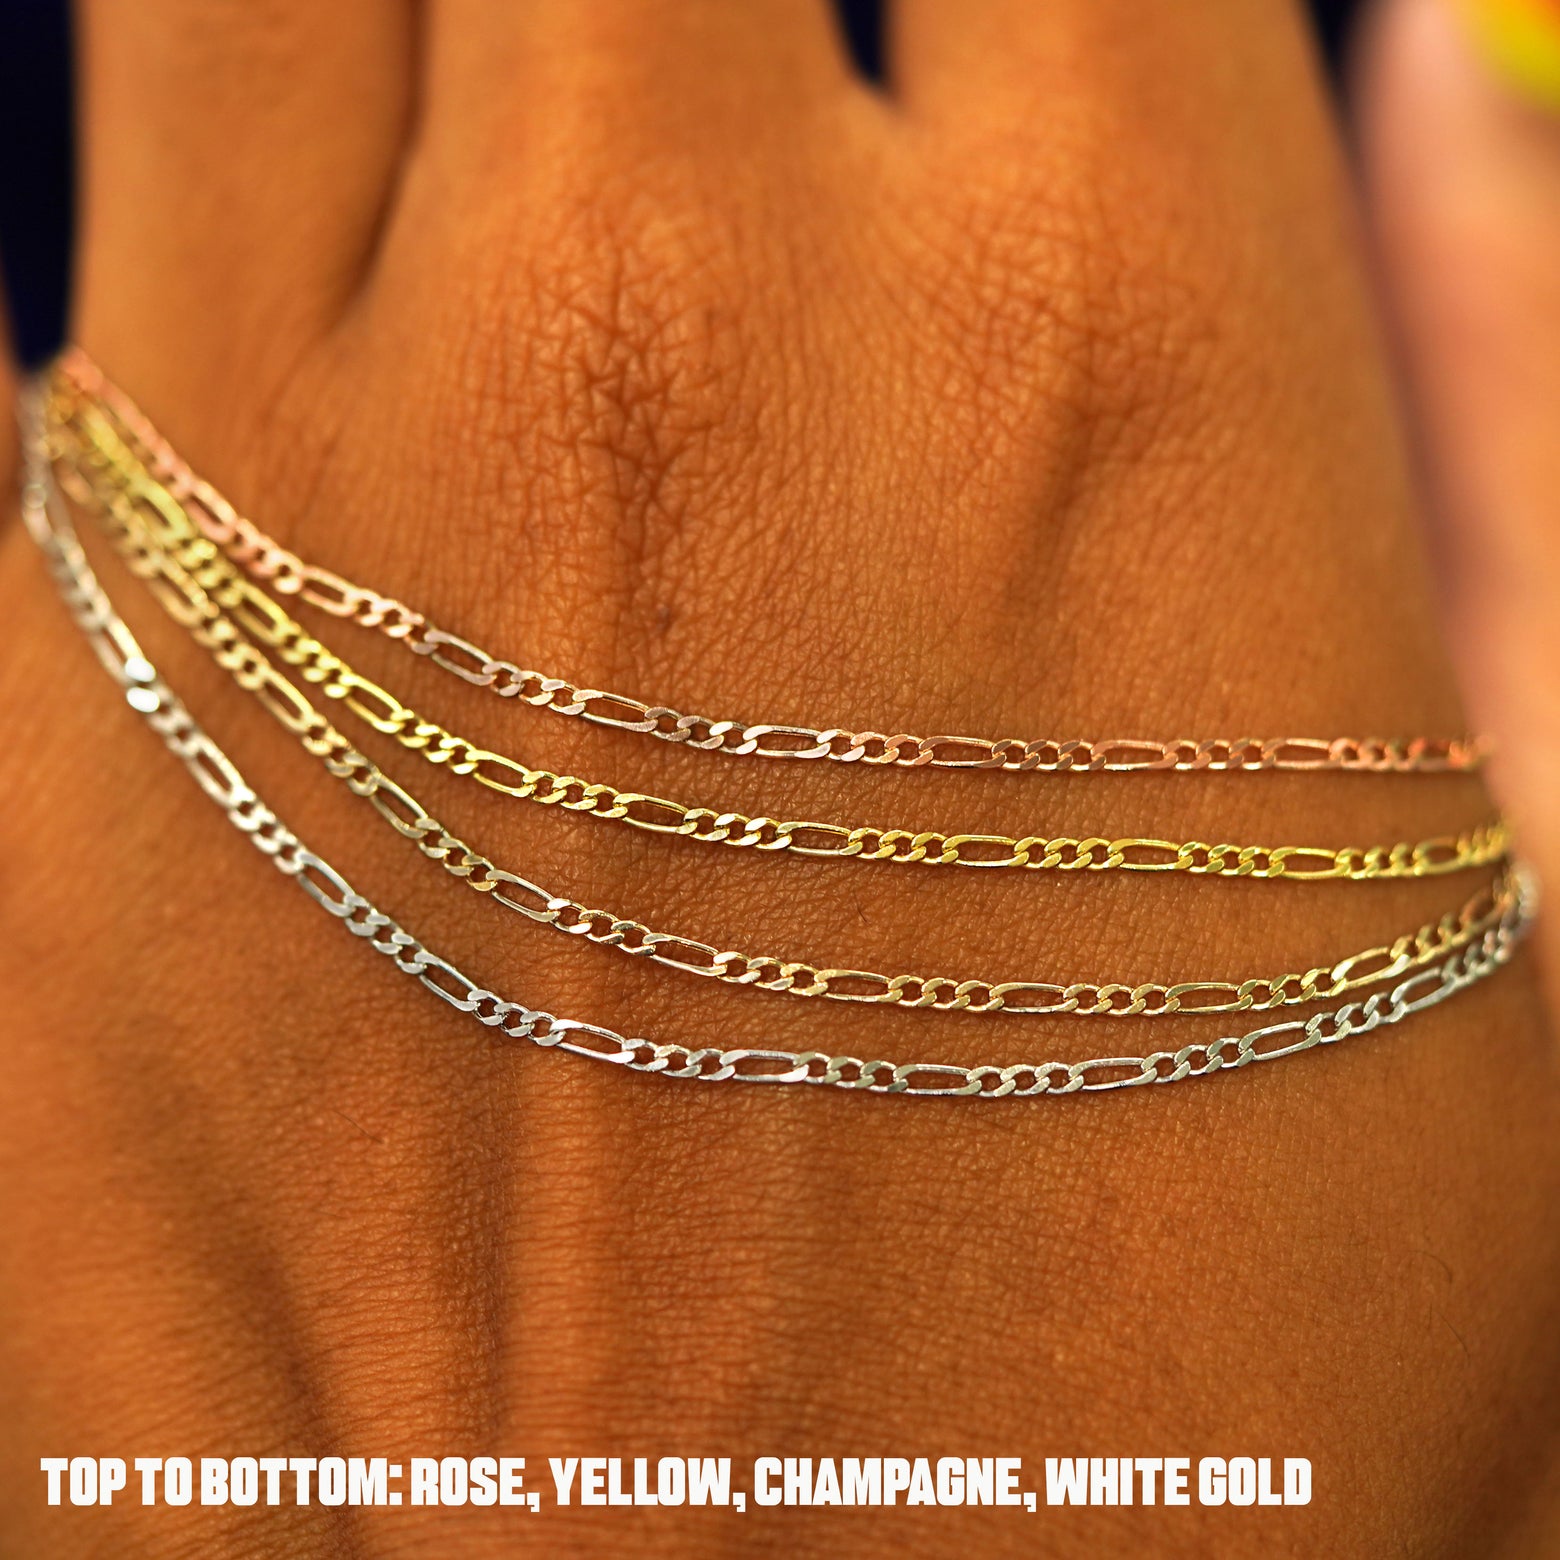 Four versions of the Figaro Bracelet in yellow, white, rose, and champagne gold draped on the back of a model's hand